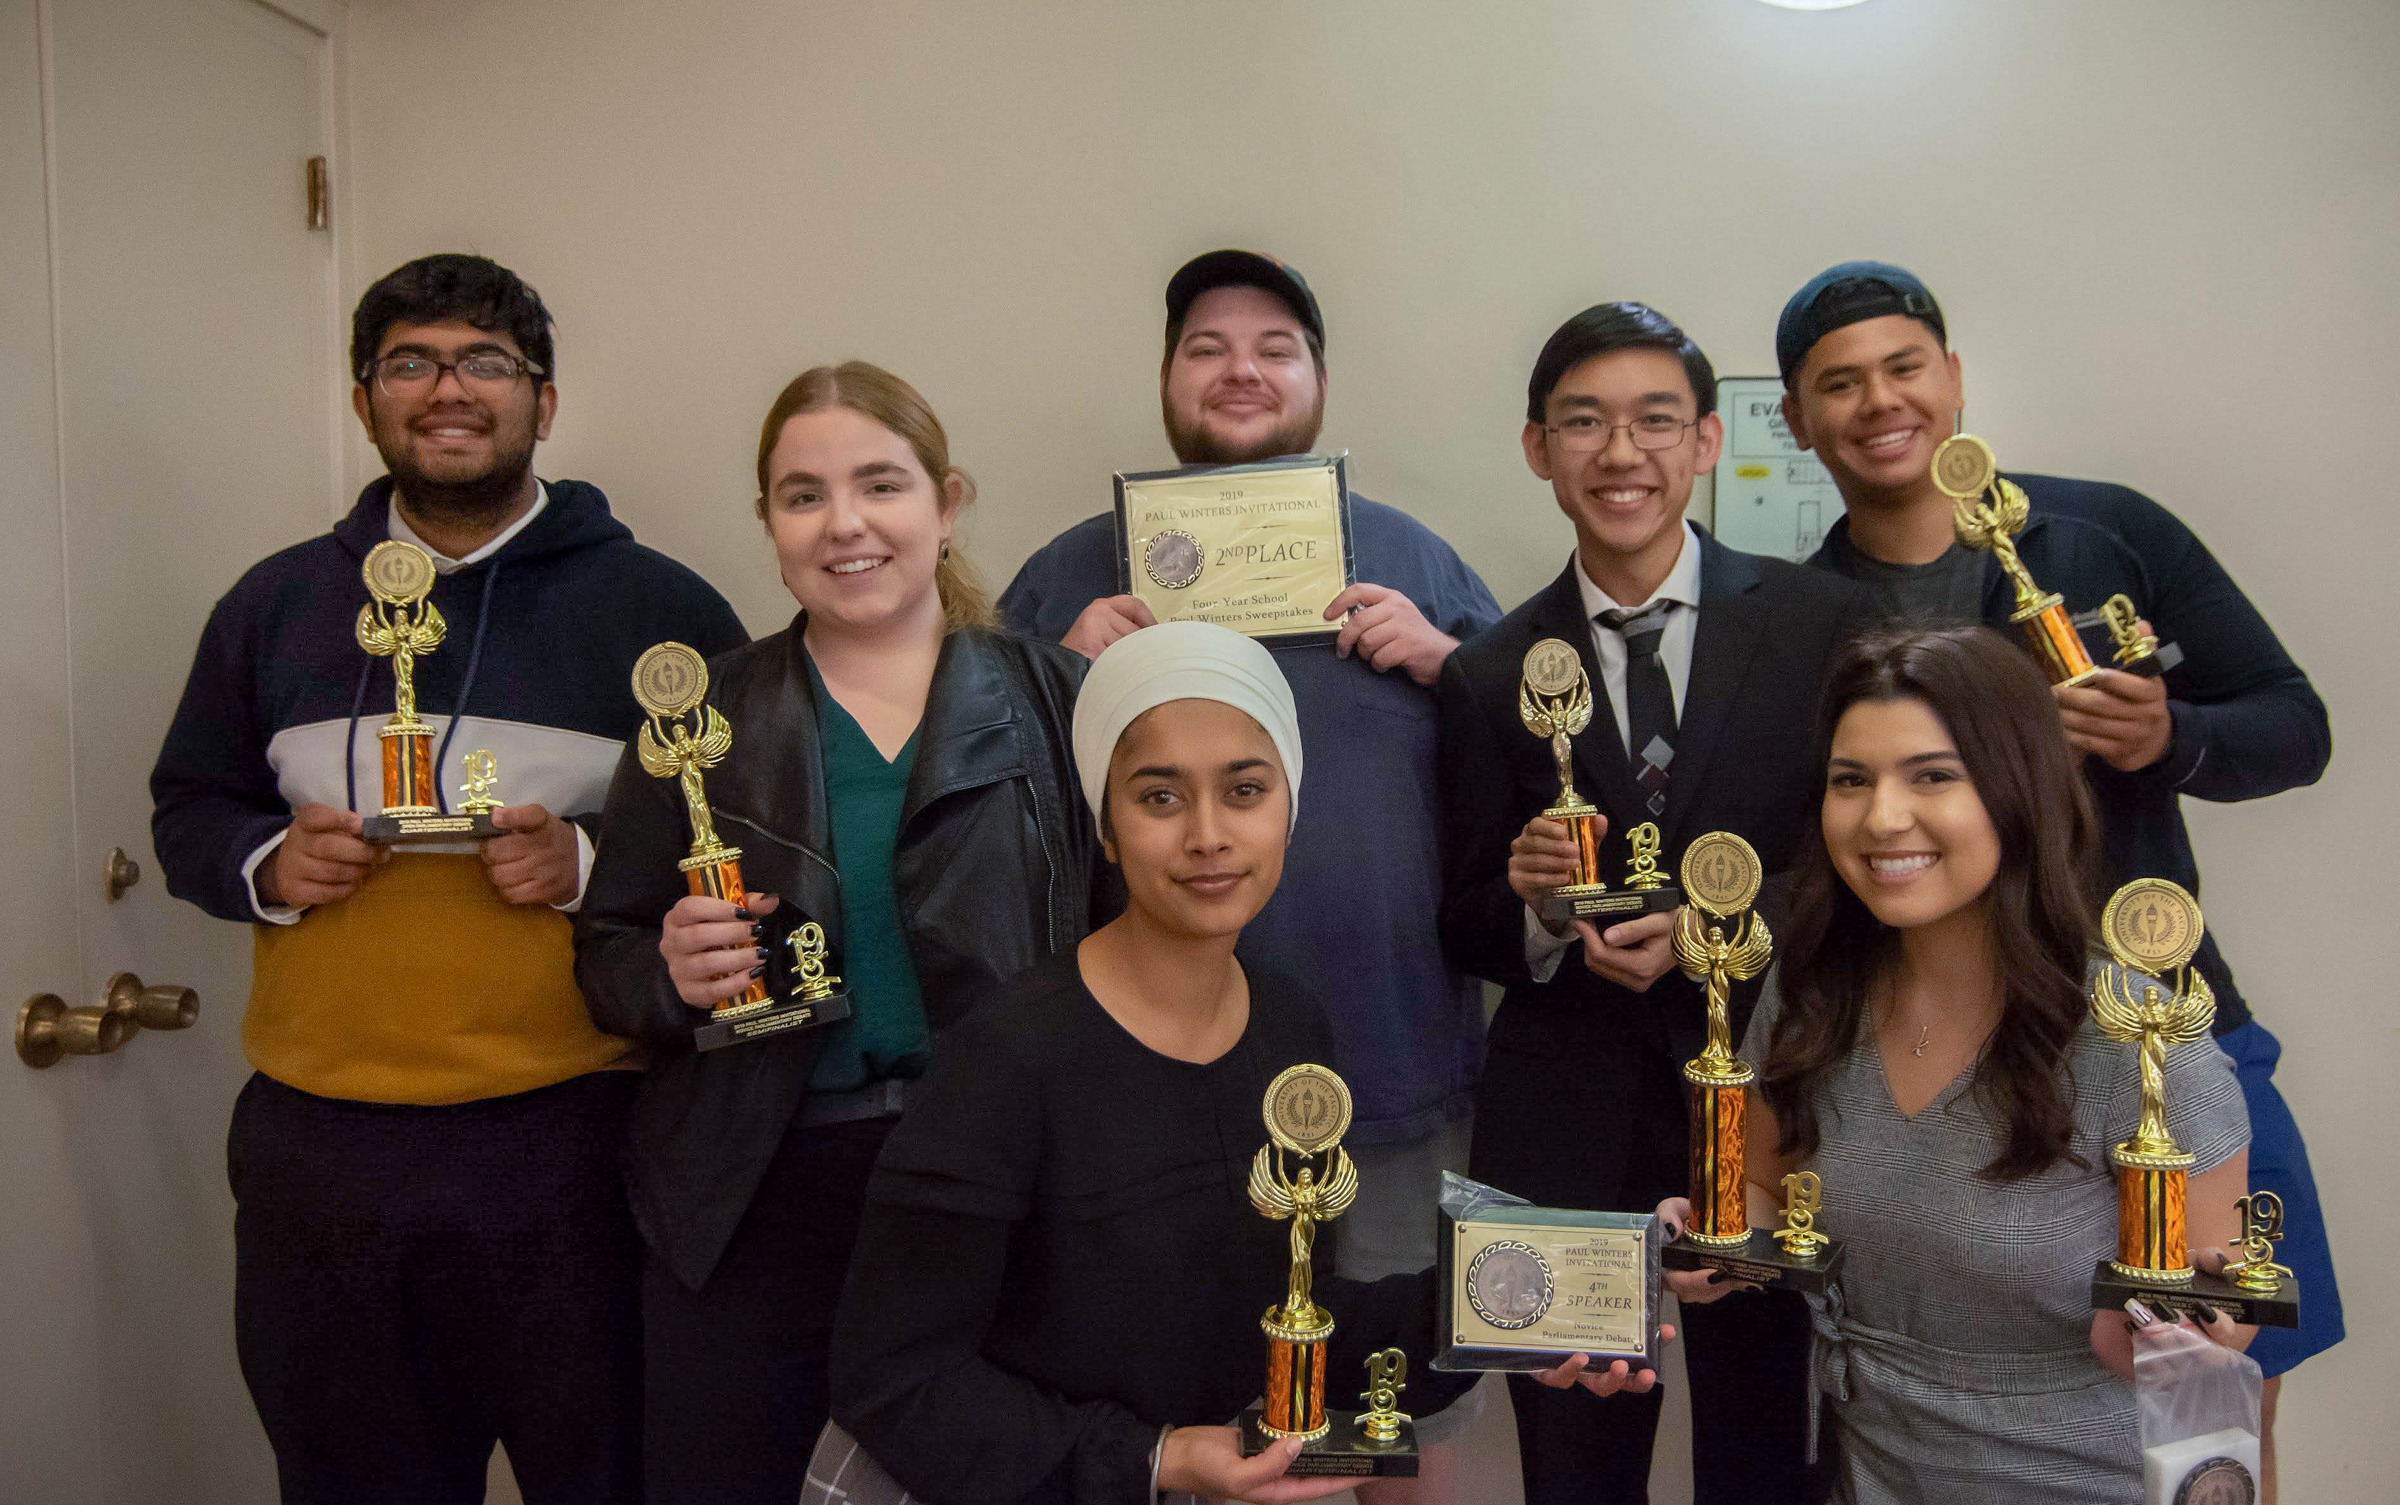 A group picture of Forensics Team members posing with their awards.